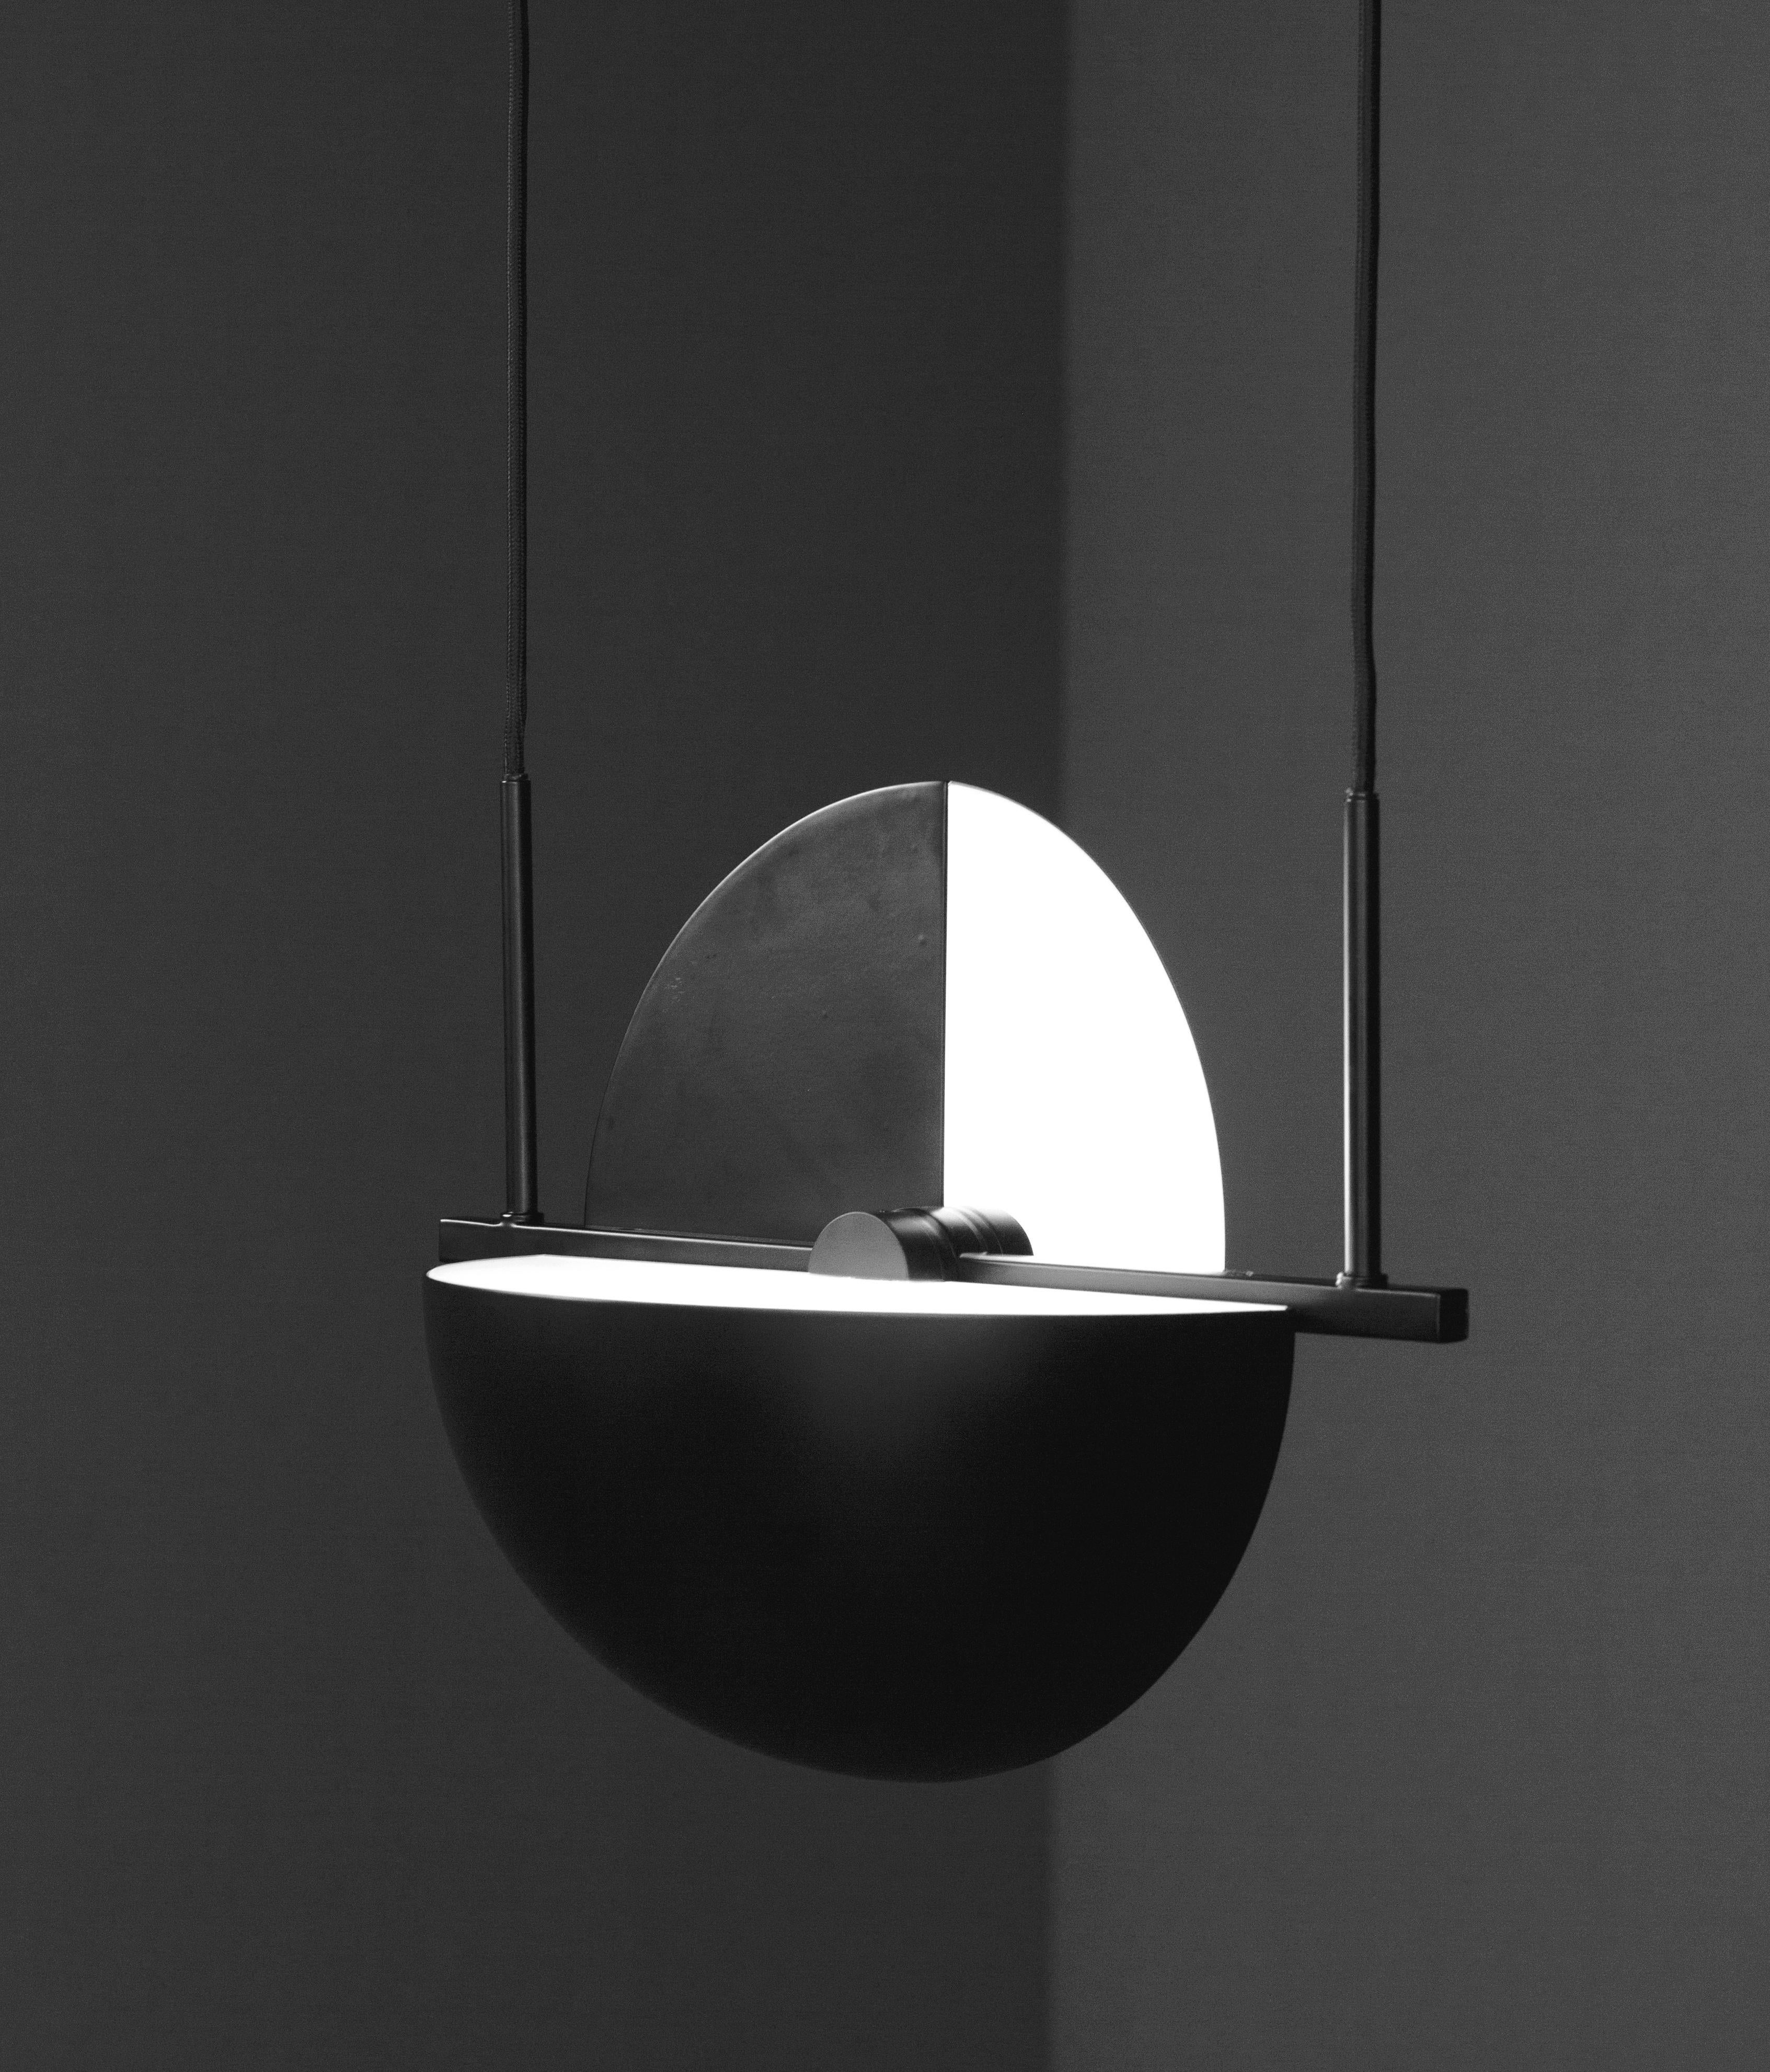 Trapeze pendant by Jette Scheib
Dimensions: 37.5 x 28 x 28 cm (Ø) (cord length: 300 cm)
A chrome version is also available.

Trapeze is as much a single pendant as it is an endless system of possibilities. The square tube has a build in